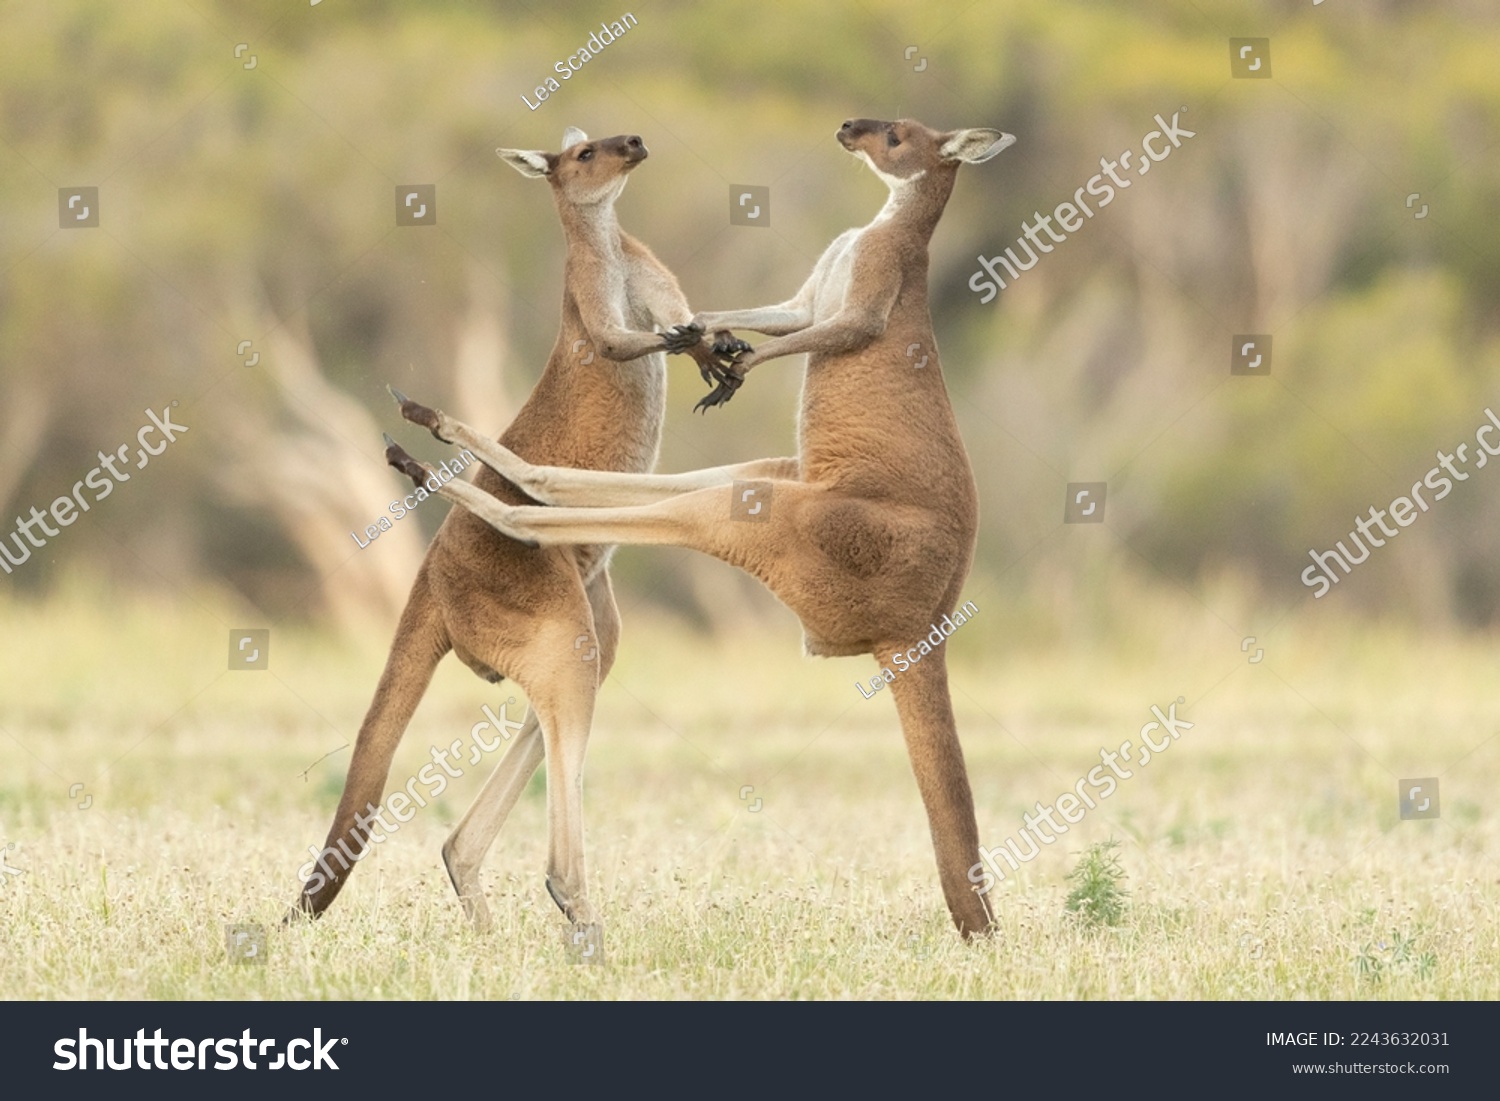 Male kangaroos fight for mating rights with female kangaroos. Kangaroos use their strong tail and hind legs to stand up and fight.  #2243632031